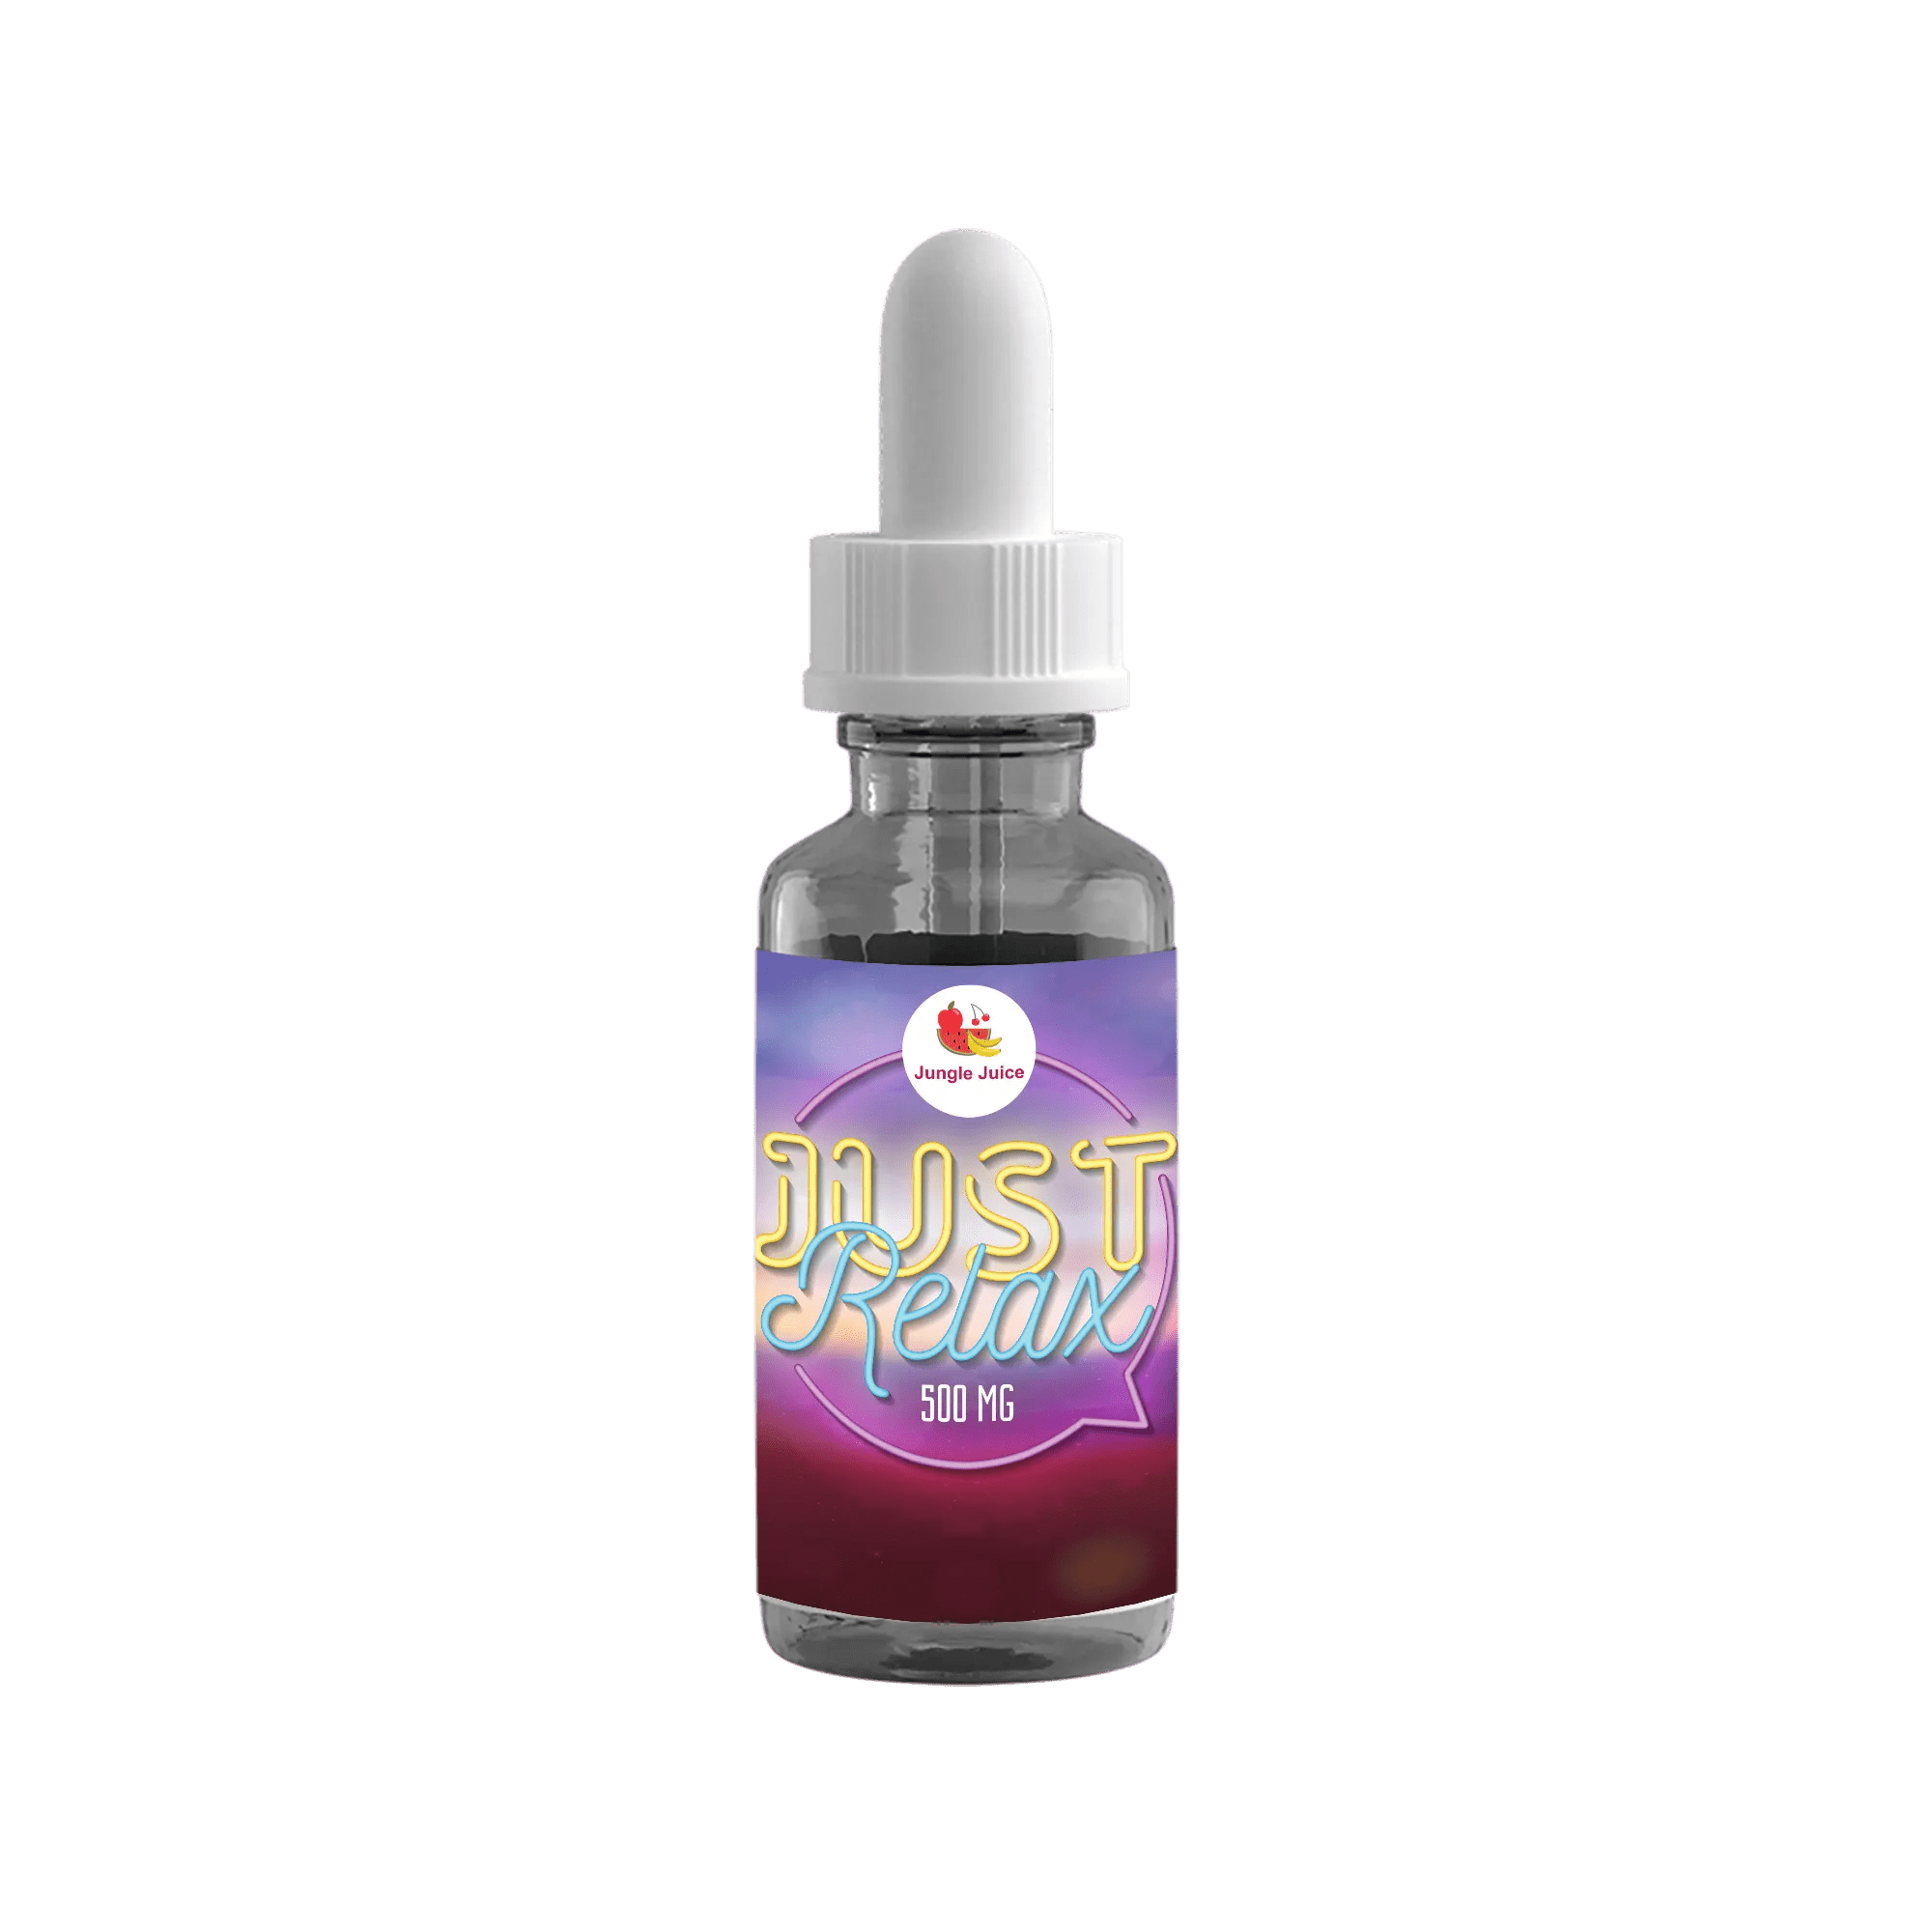 Super Chill CBD Relax Tincture - Full Spectrum - 30 ML - 500 MG - 100% Natural - Made in USA